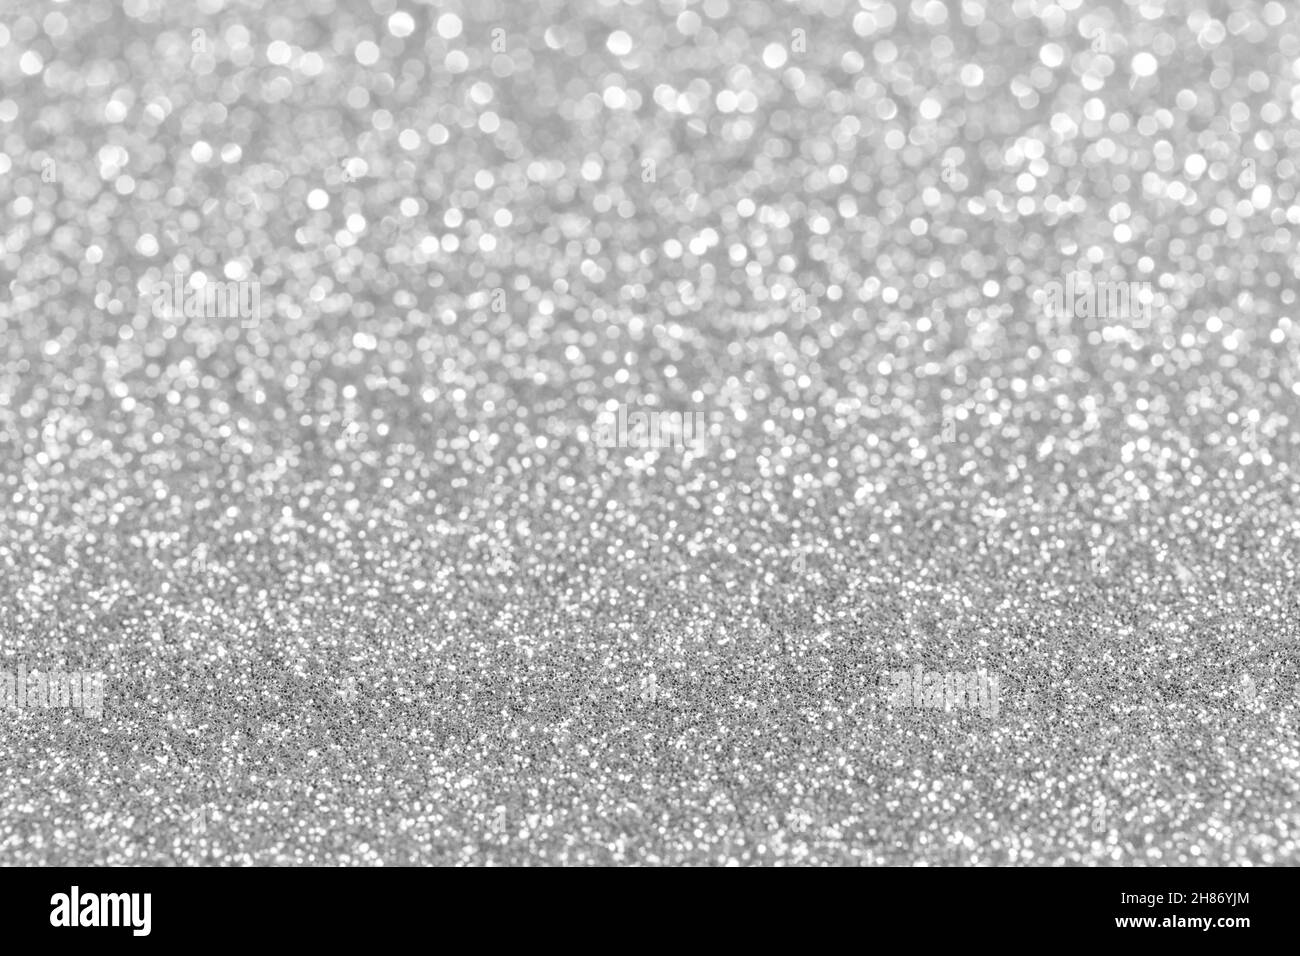 Shiny silver defocused glitter holiday background with copy space Stock ...